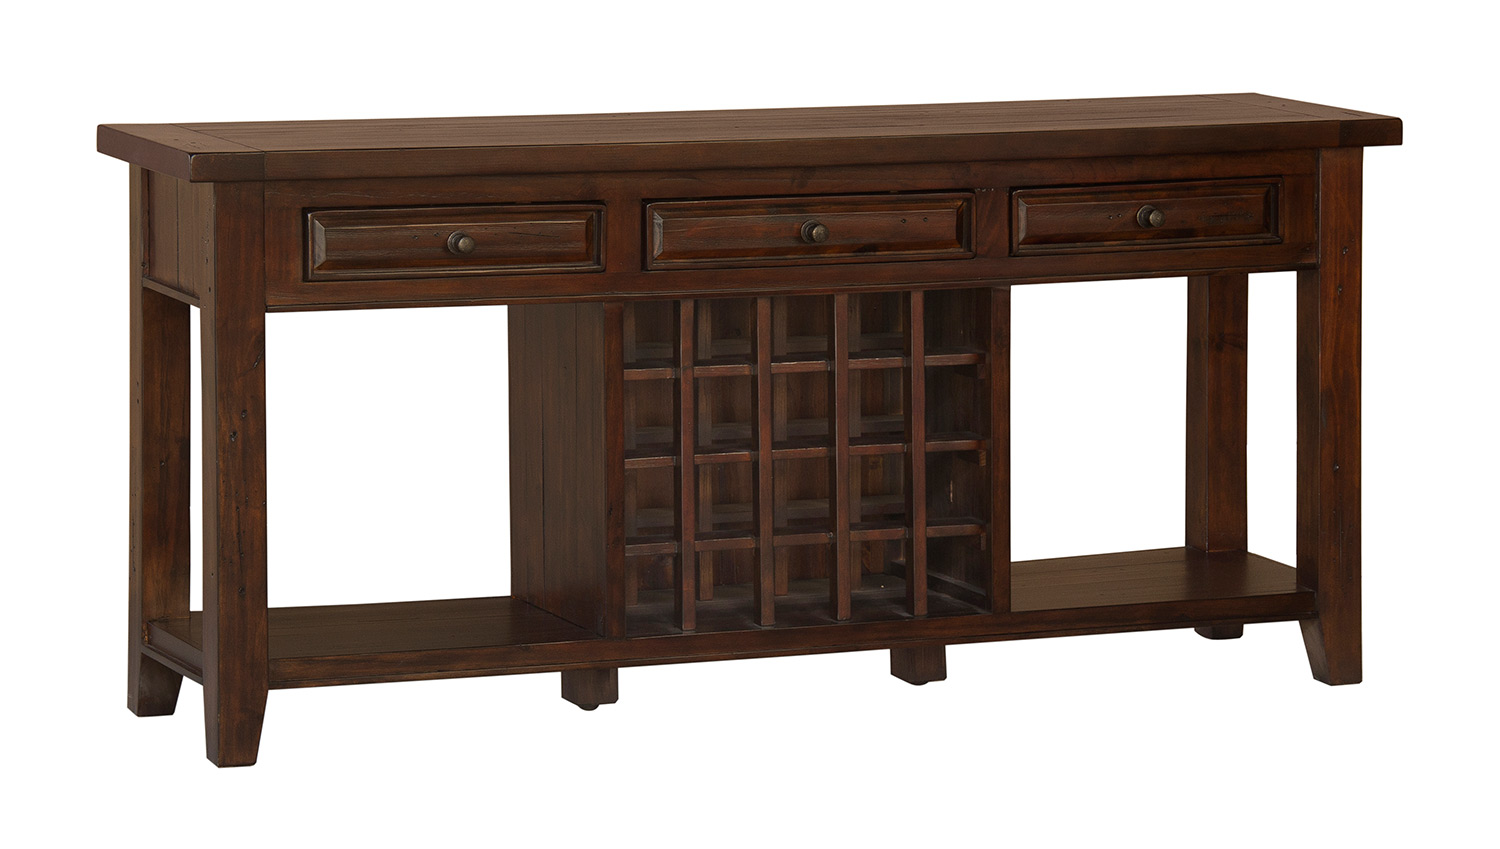 Hillsdale Tuscan Retreat Sideboard with 20 Bottle Wine Storage - Rustic Mahogany